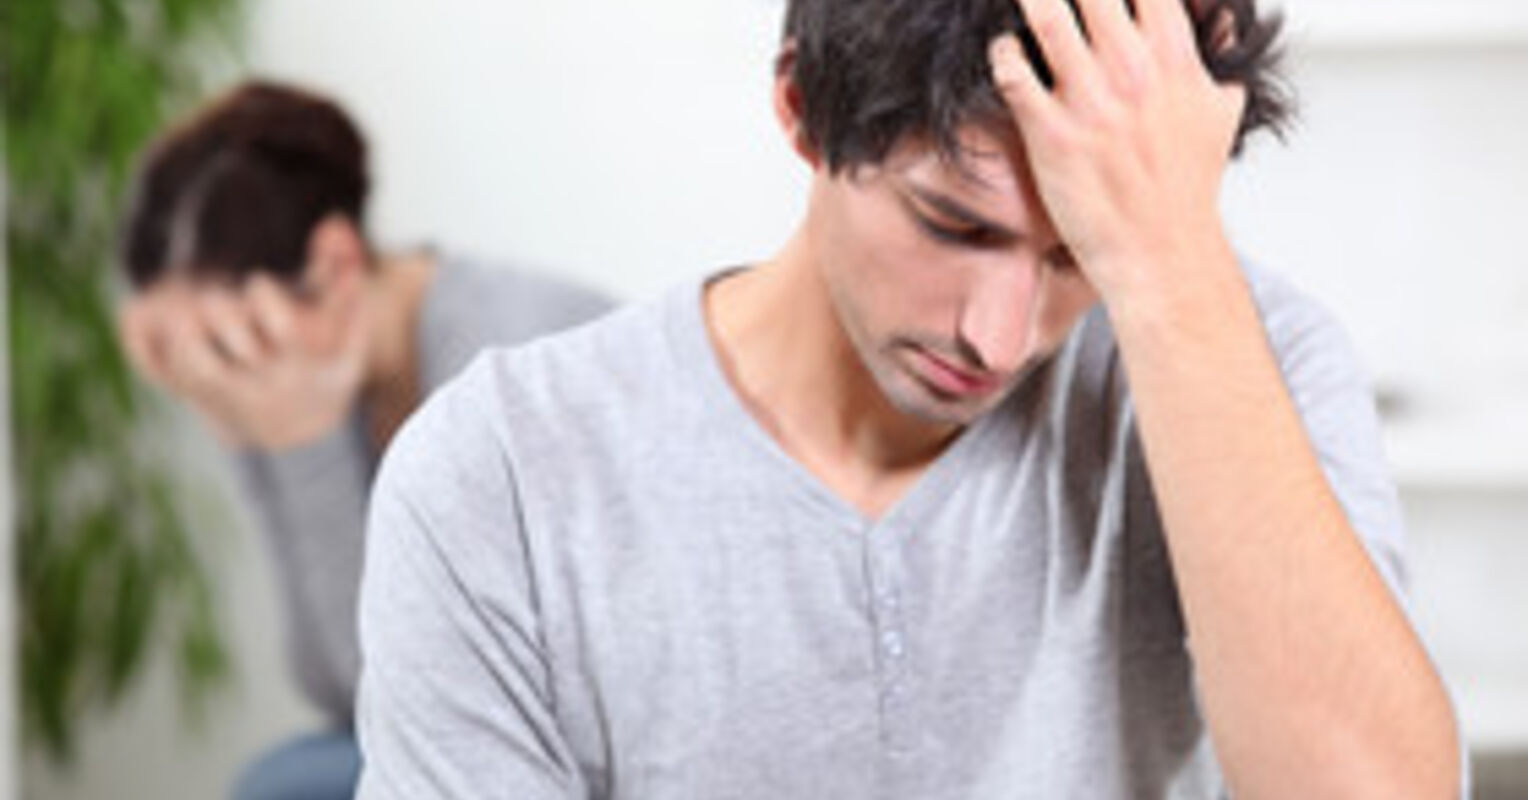 Recovery From an Affair: What Both Spouses Need To HealPsychology Today